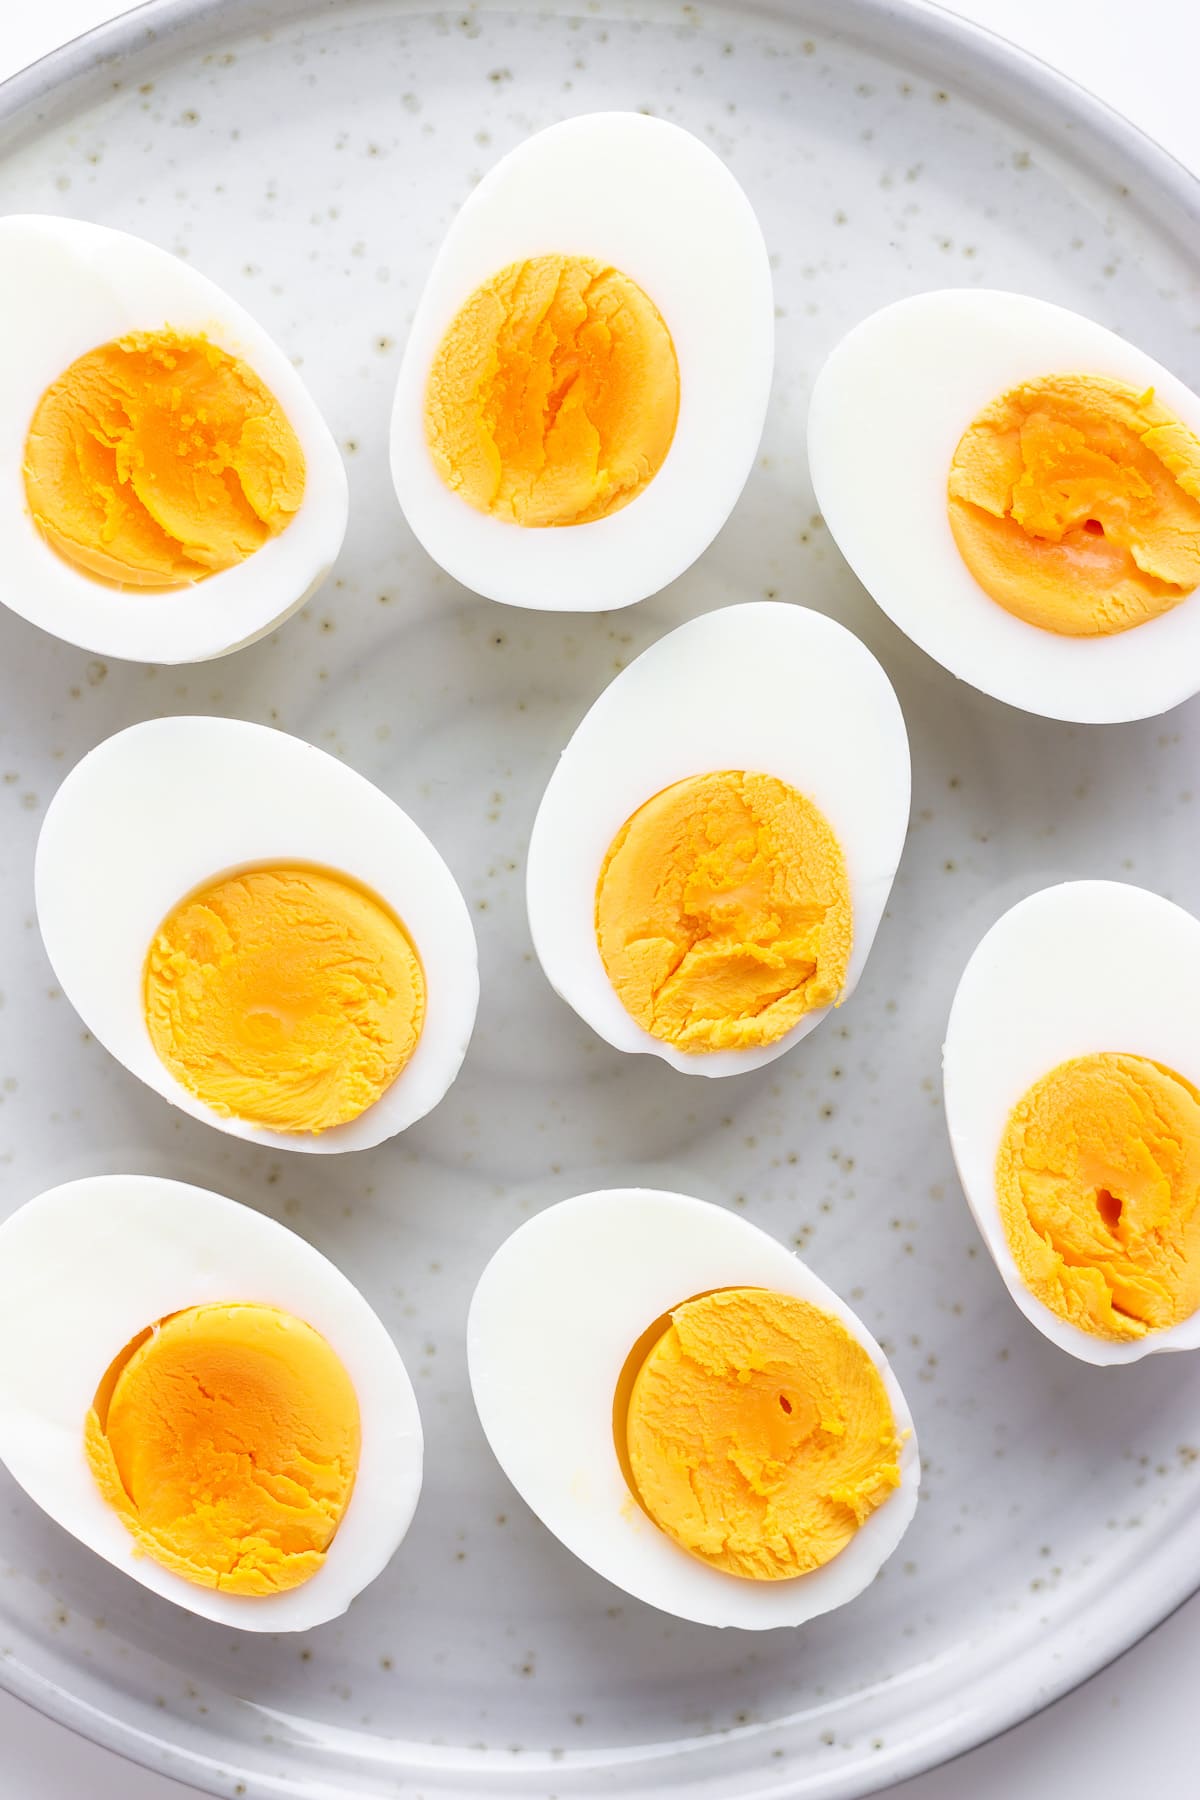 Closeup of halved hard boiled eggs arranged on a plate.